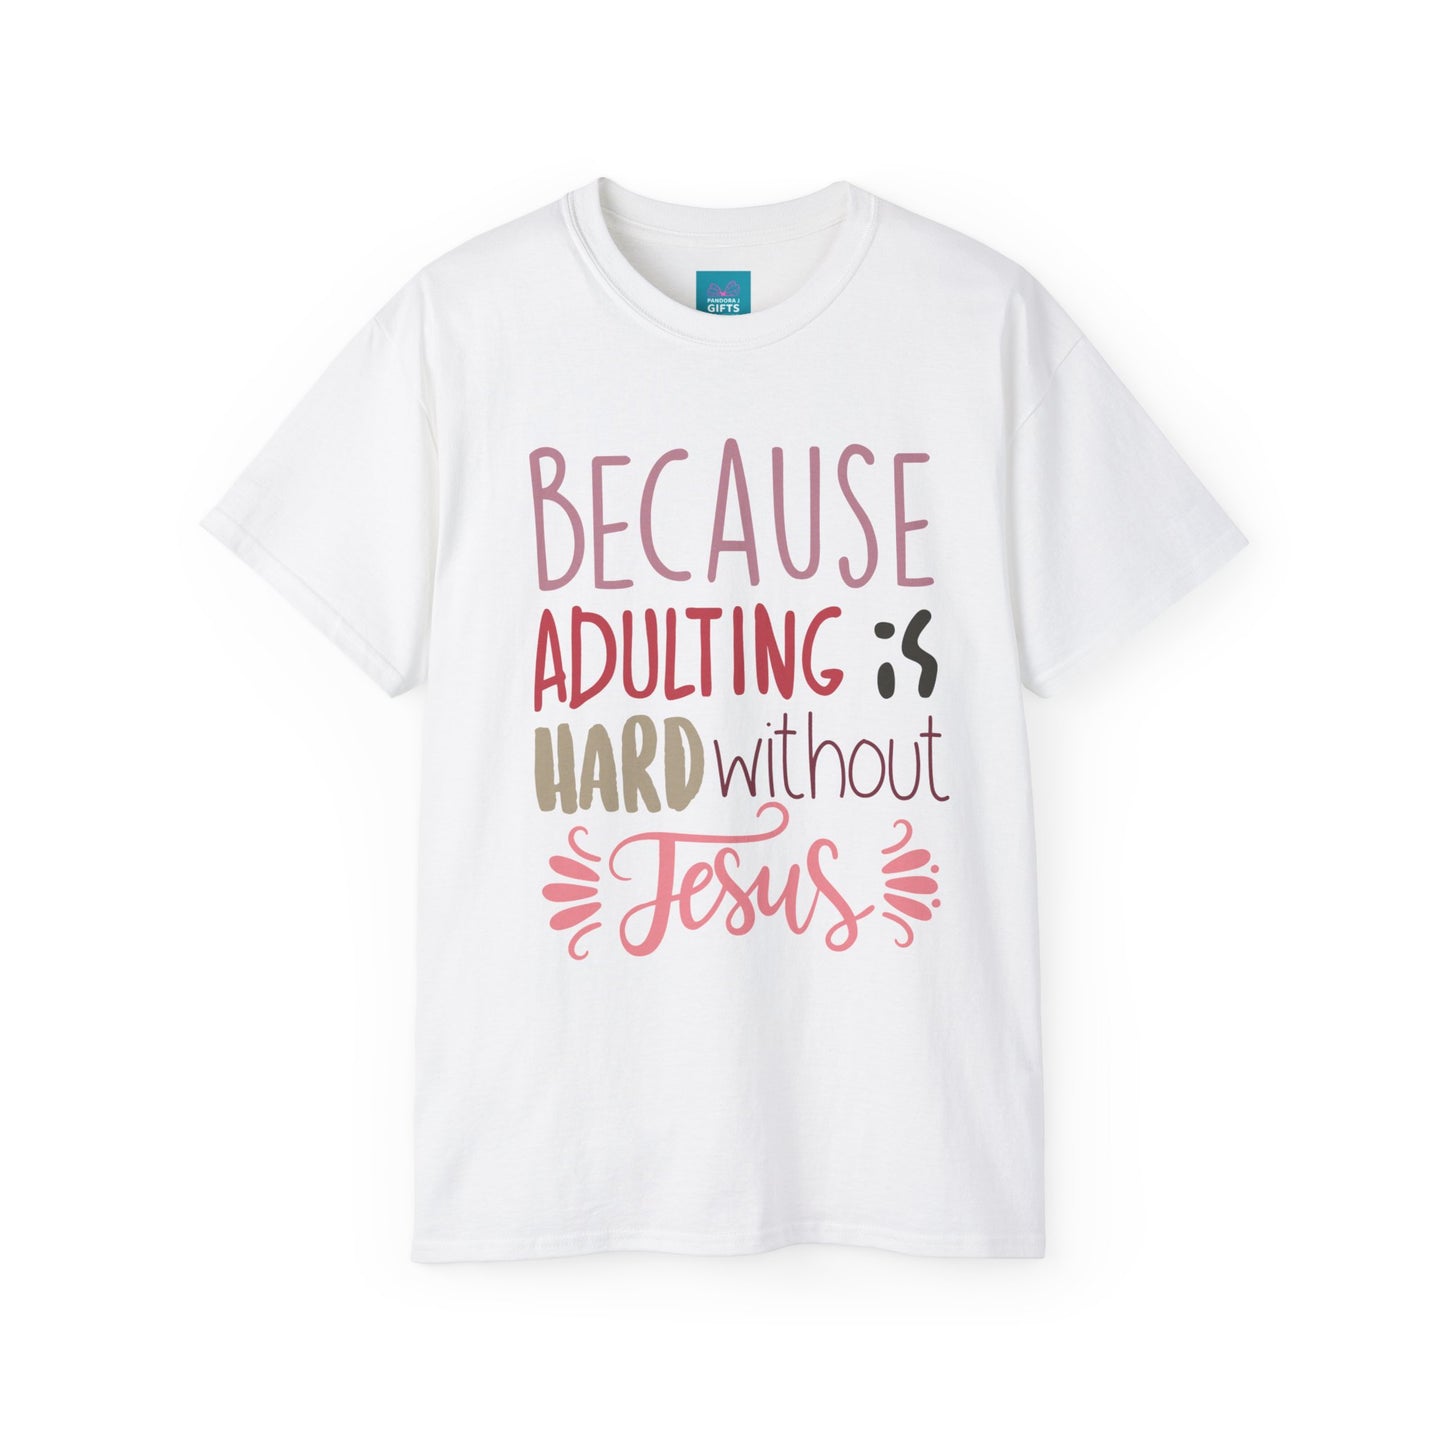 white shirt with words "Because Adulting is Hard without Jesus"